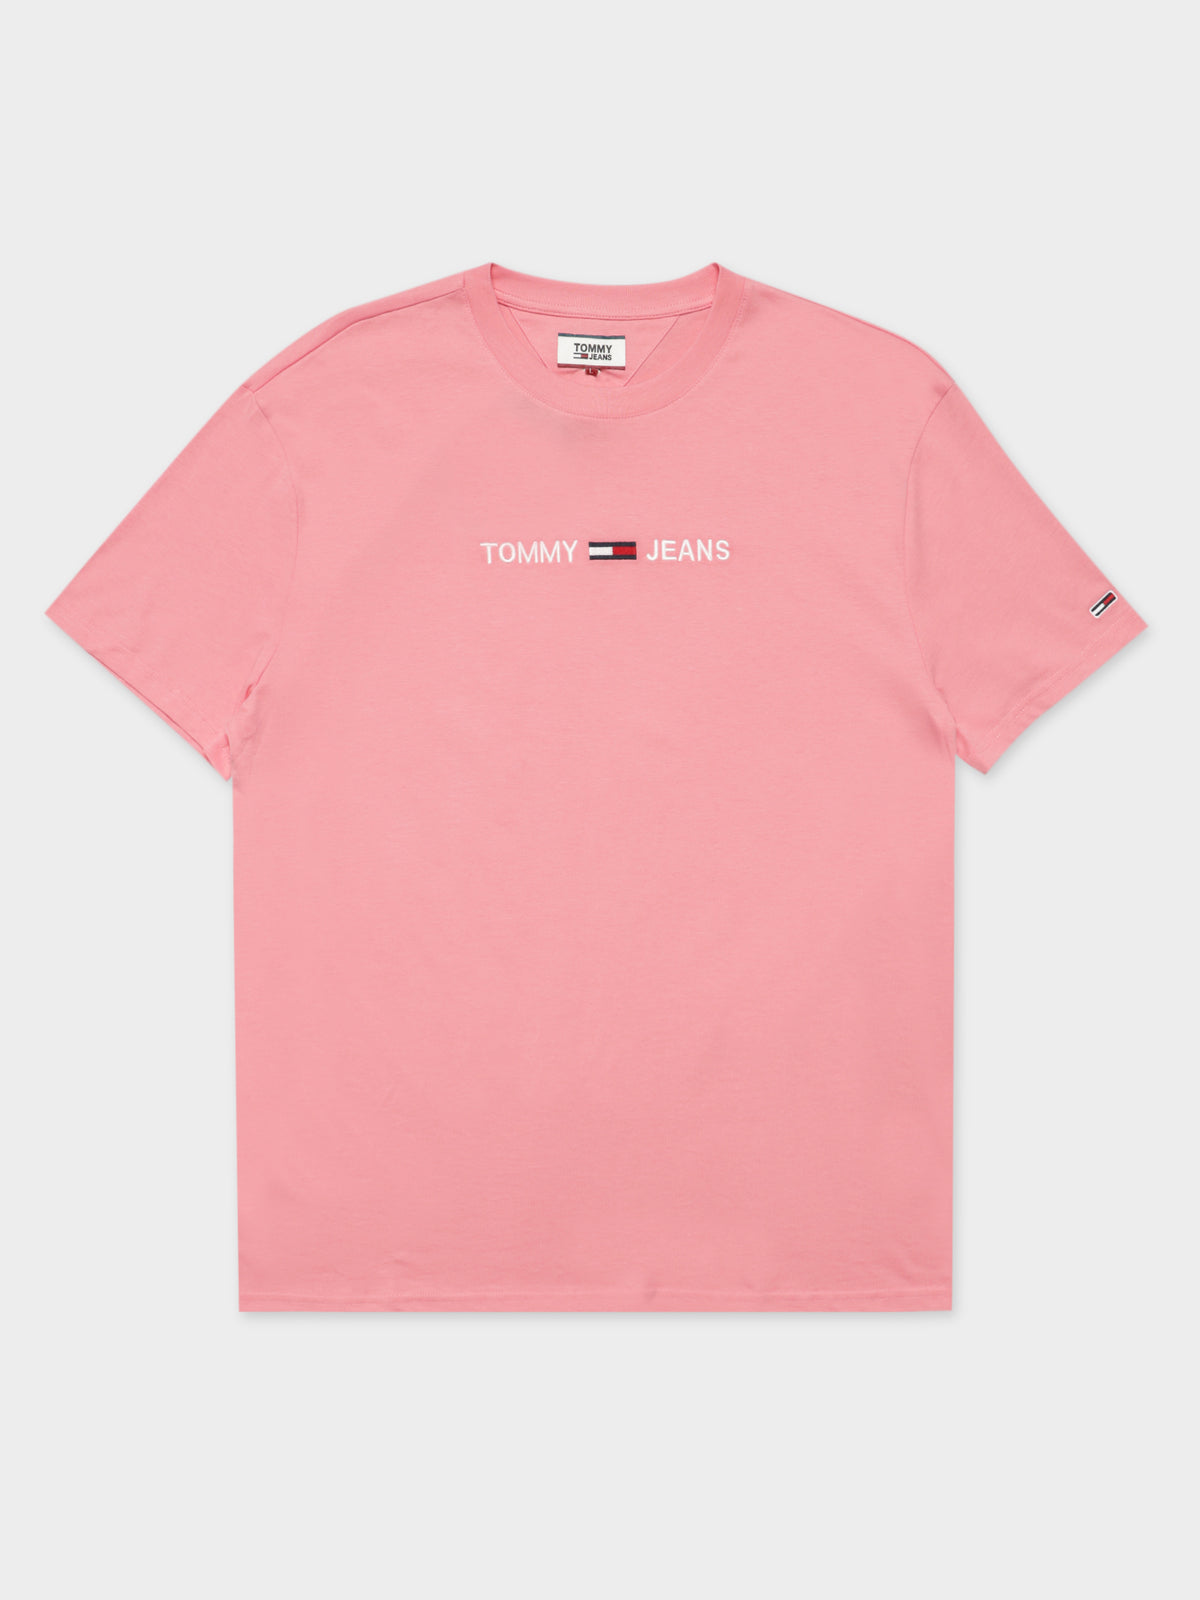 Straight Logo T-Shirt in Rosey Pink